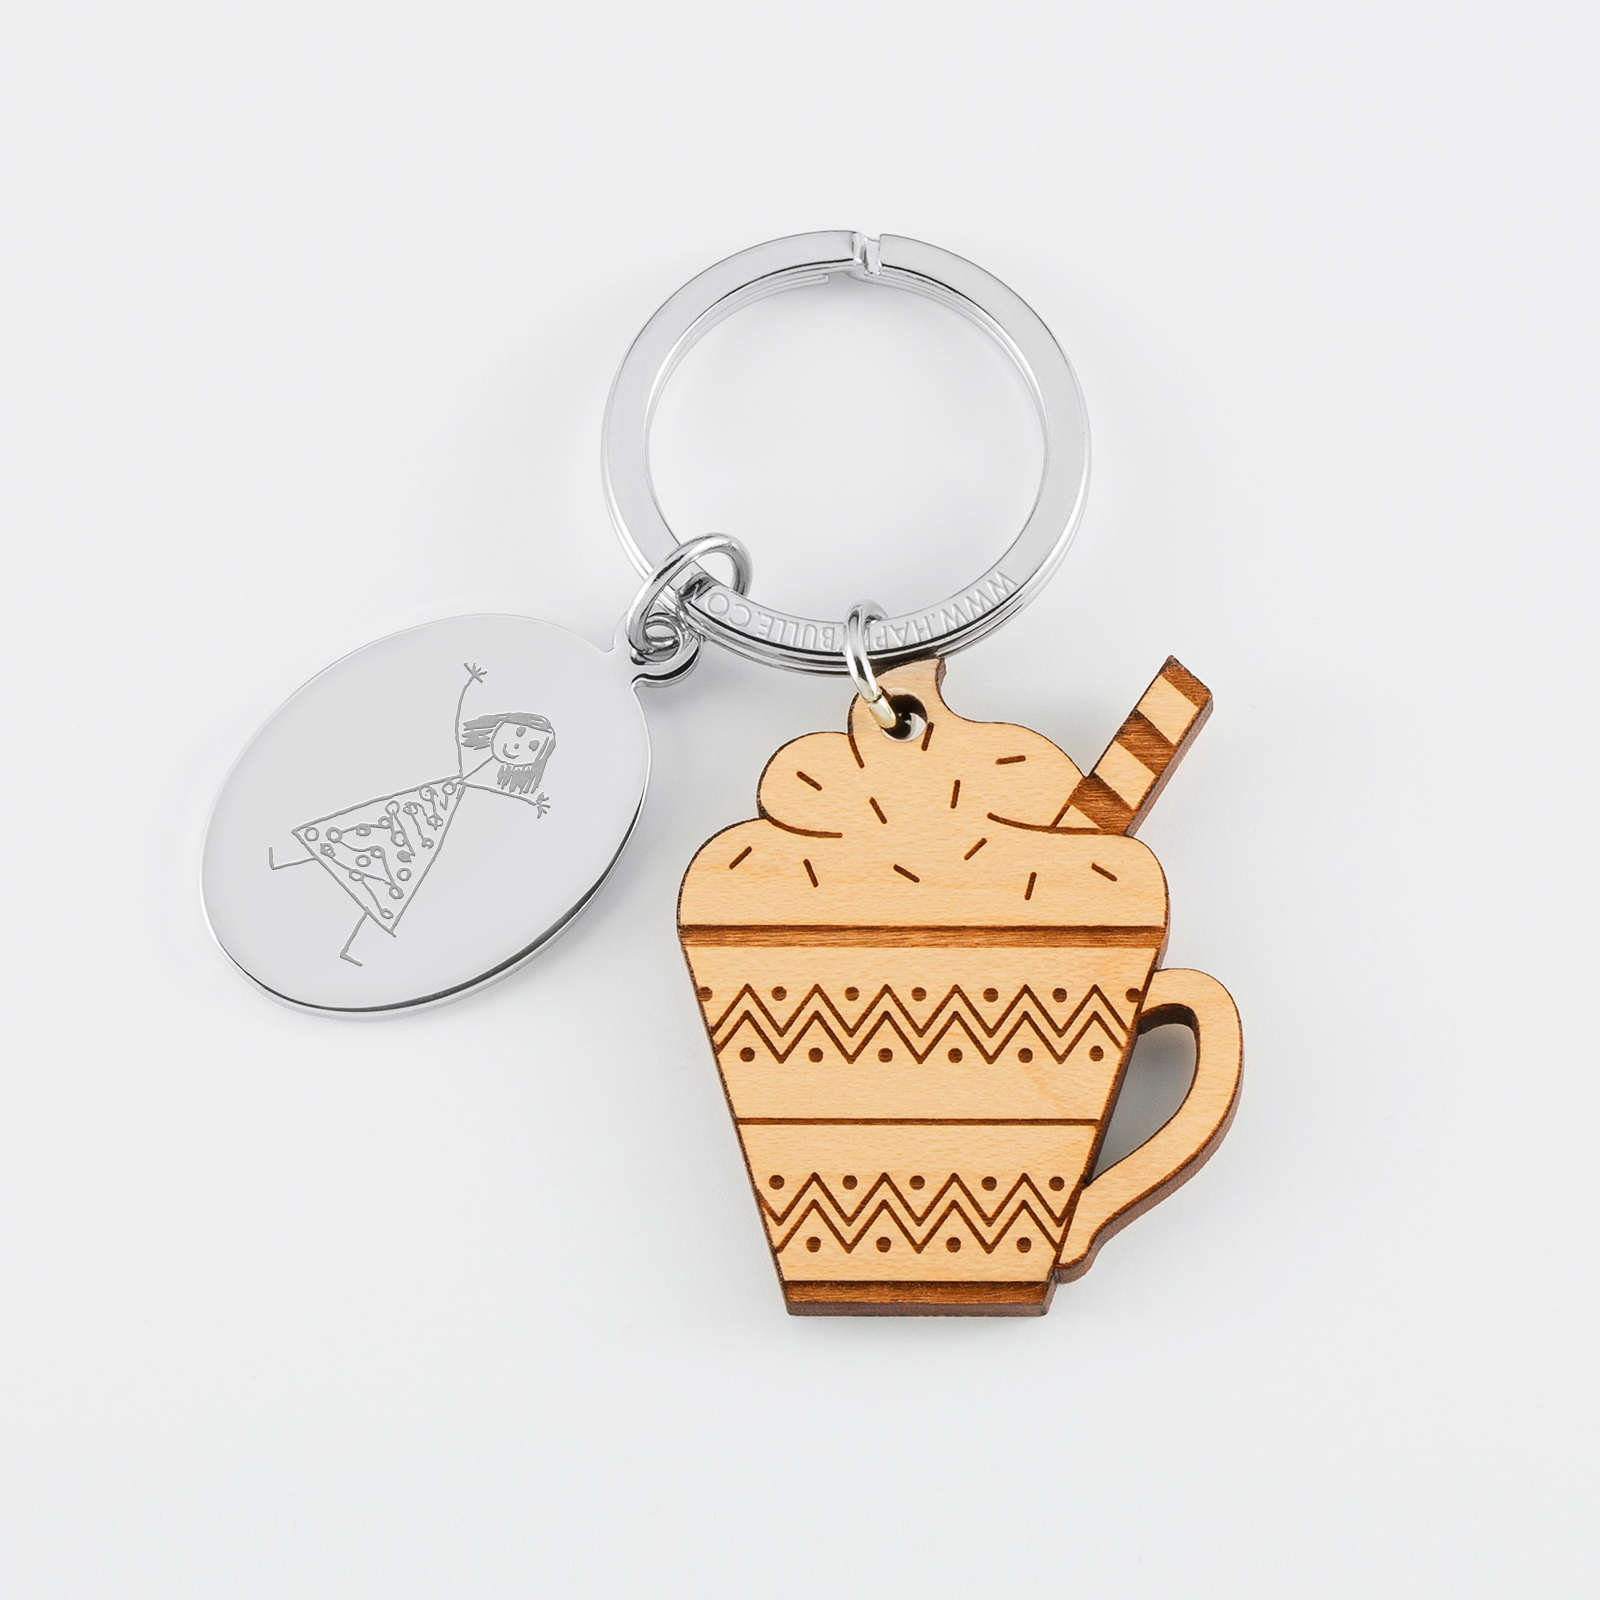 Personalised engraved oval steel medallion and wooden Viennese chocolate charm keyring - sketch